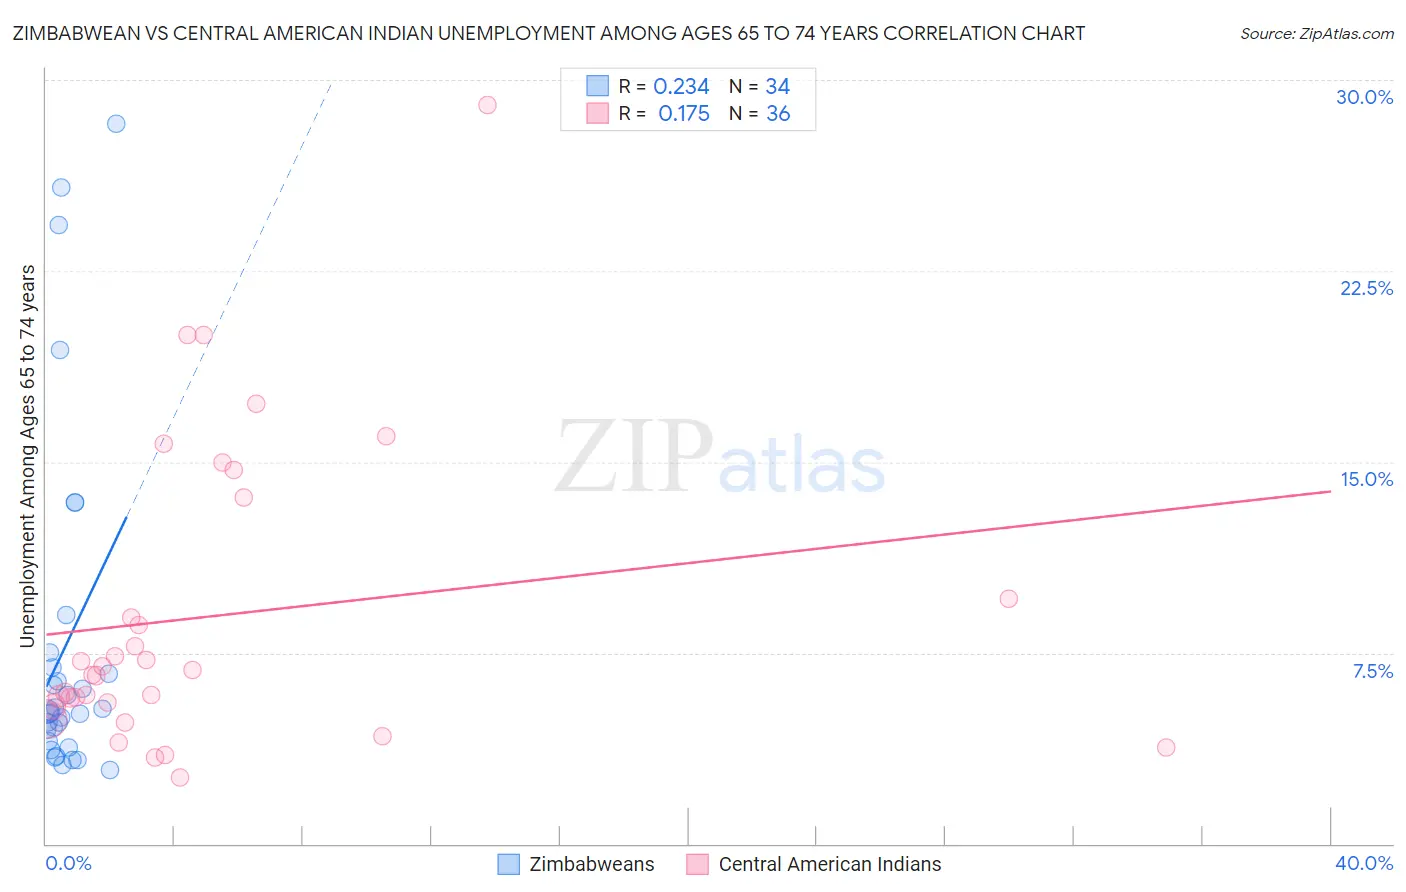 Zimbabwean vs Central American Indian Unemployment Among Ages 65 to 74 years